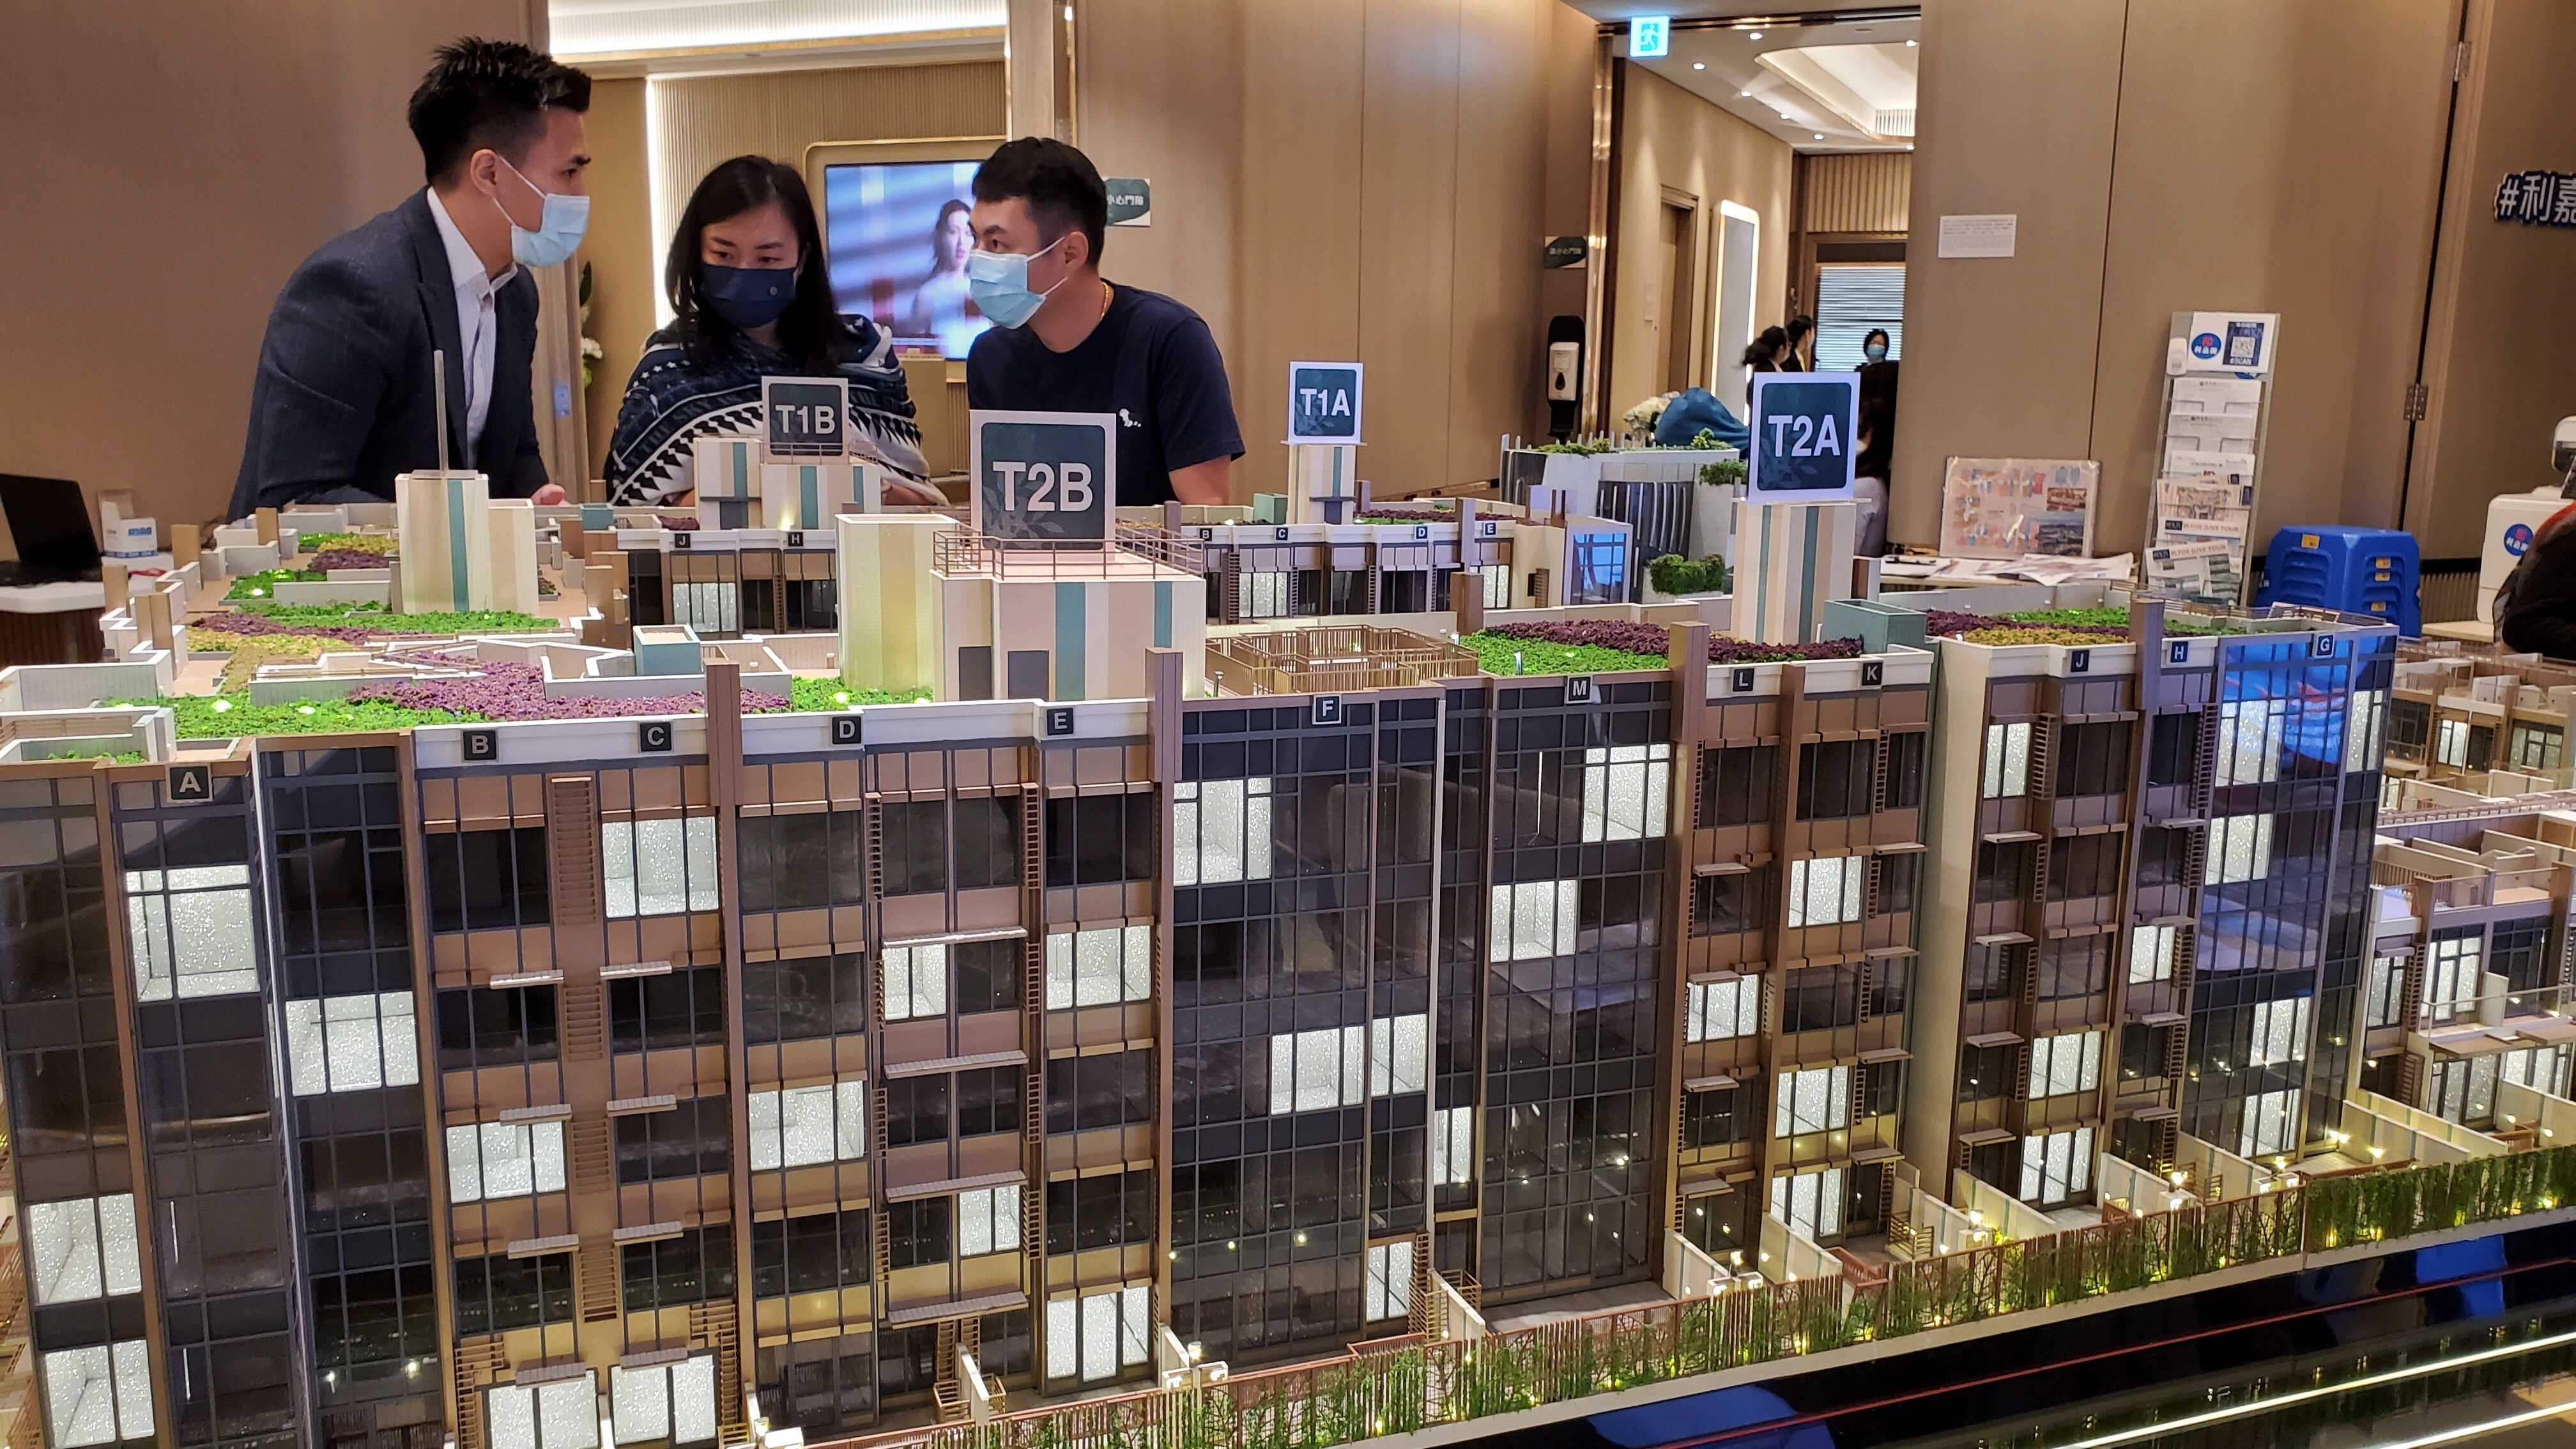 Buyers viewing a model of the #Lyos flats in Hung Shui Kiu at CK Asset Holdings’ sales office in Hung Hom on 4 November 21. Photo: Edmond So